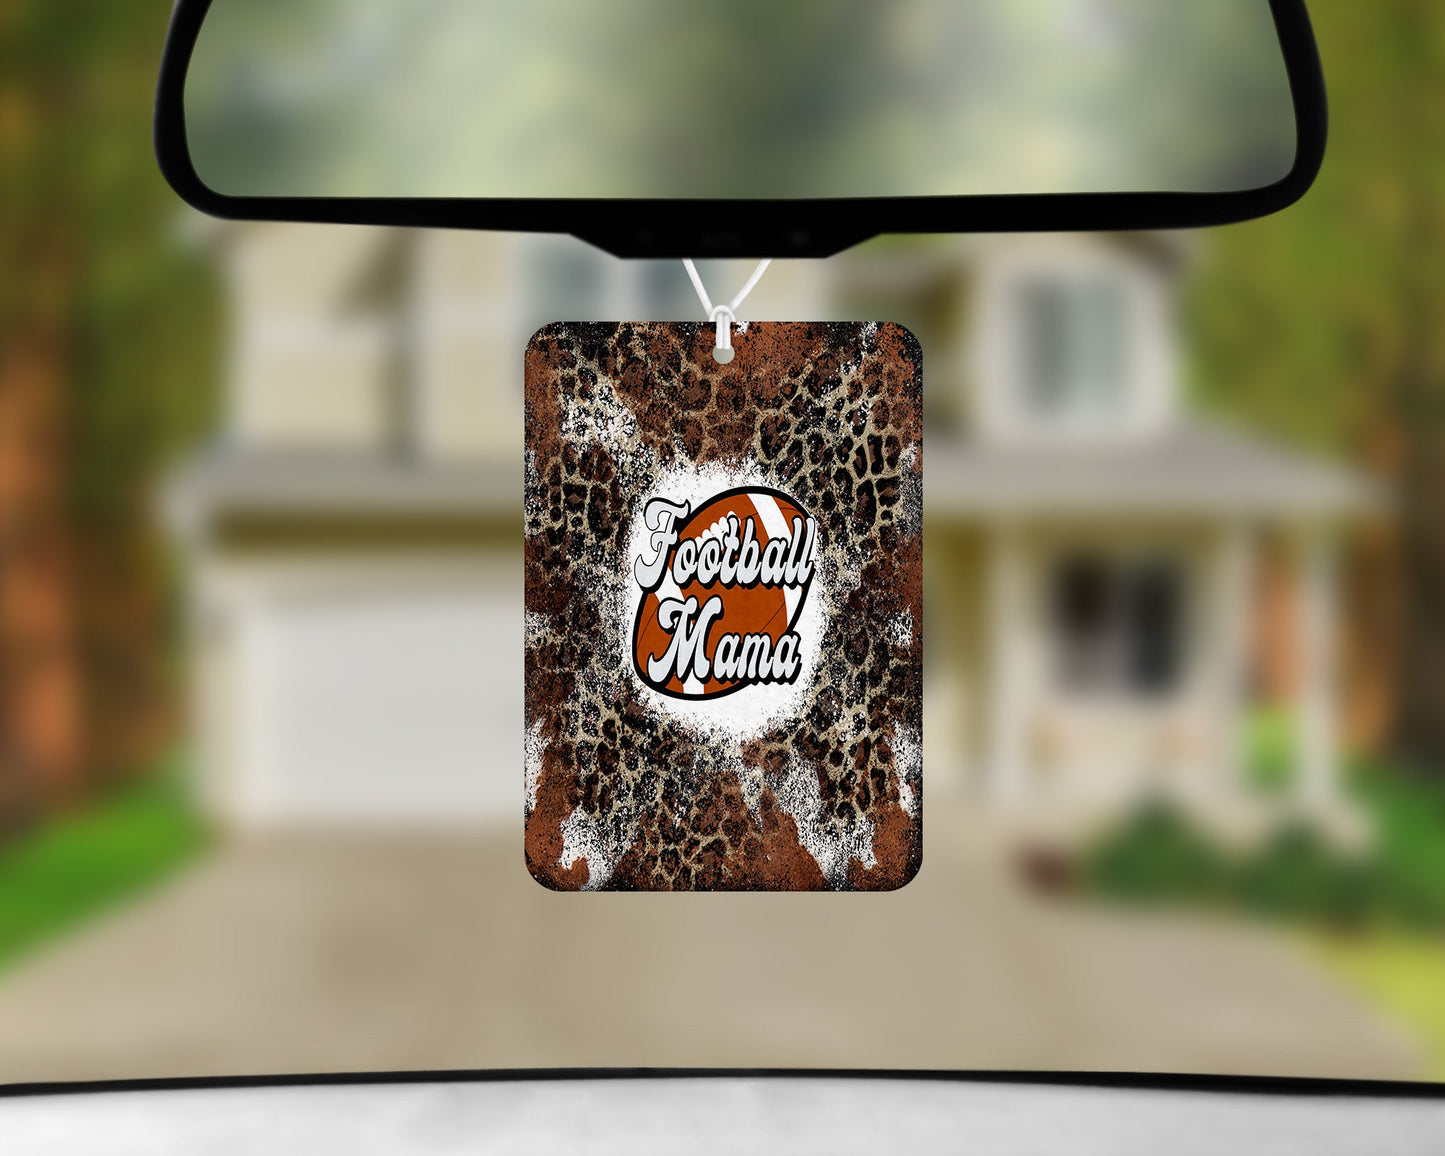 Football Mama|Freshie|Includes Scent Bottle - Vehicle Air Freshener